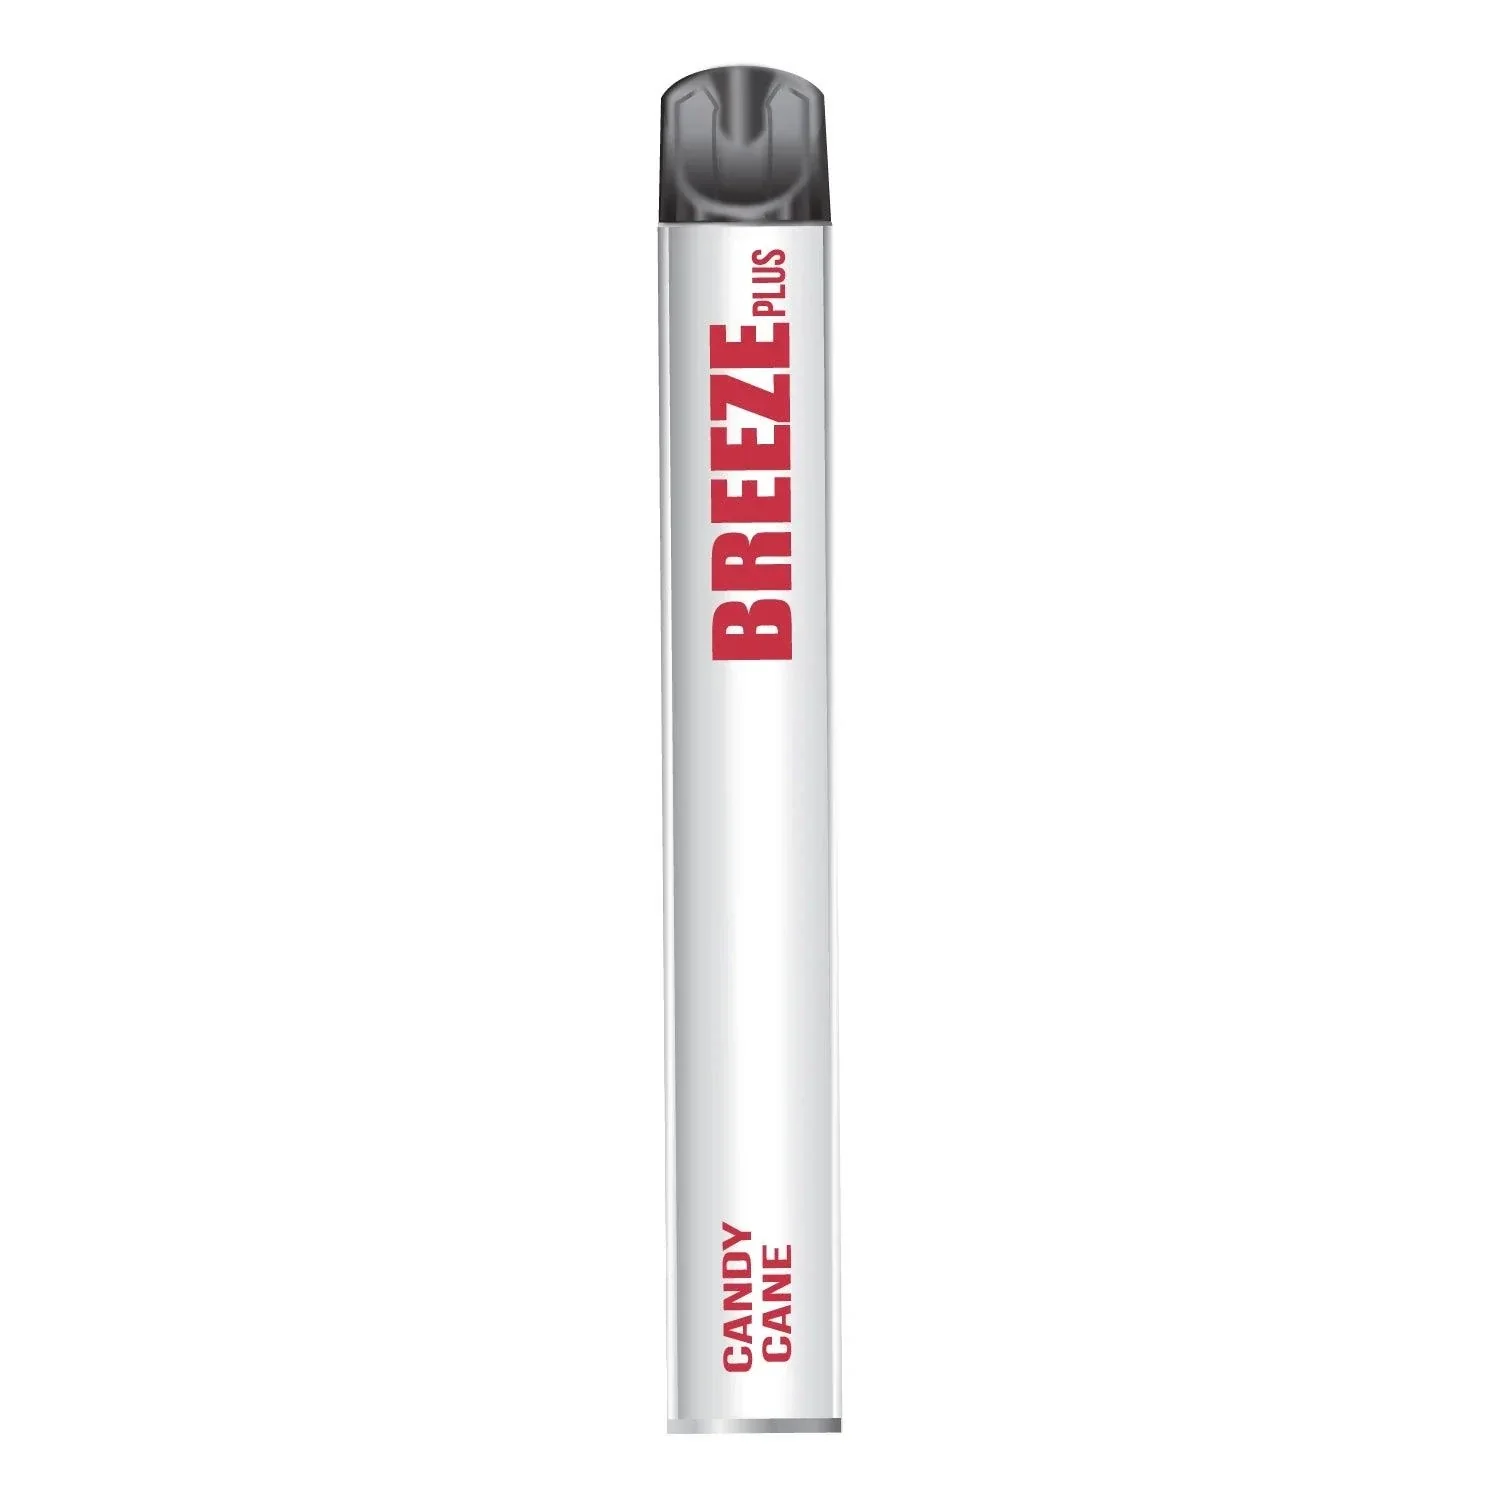 A Flavorful Journey: Breeze Plus 800 Puffs Candy Cane Device Unveiled